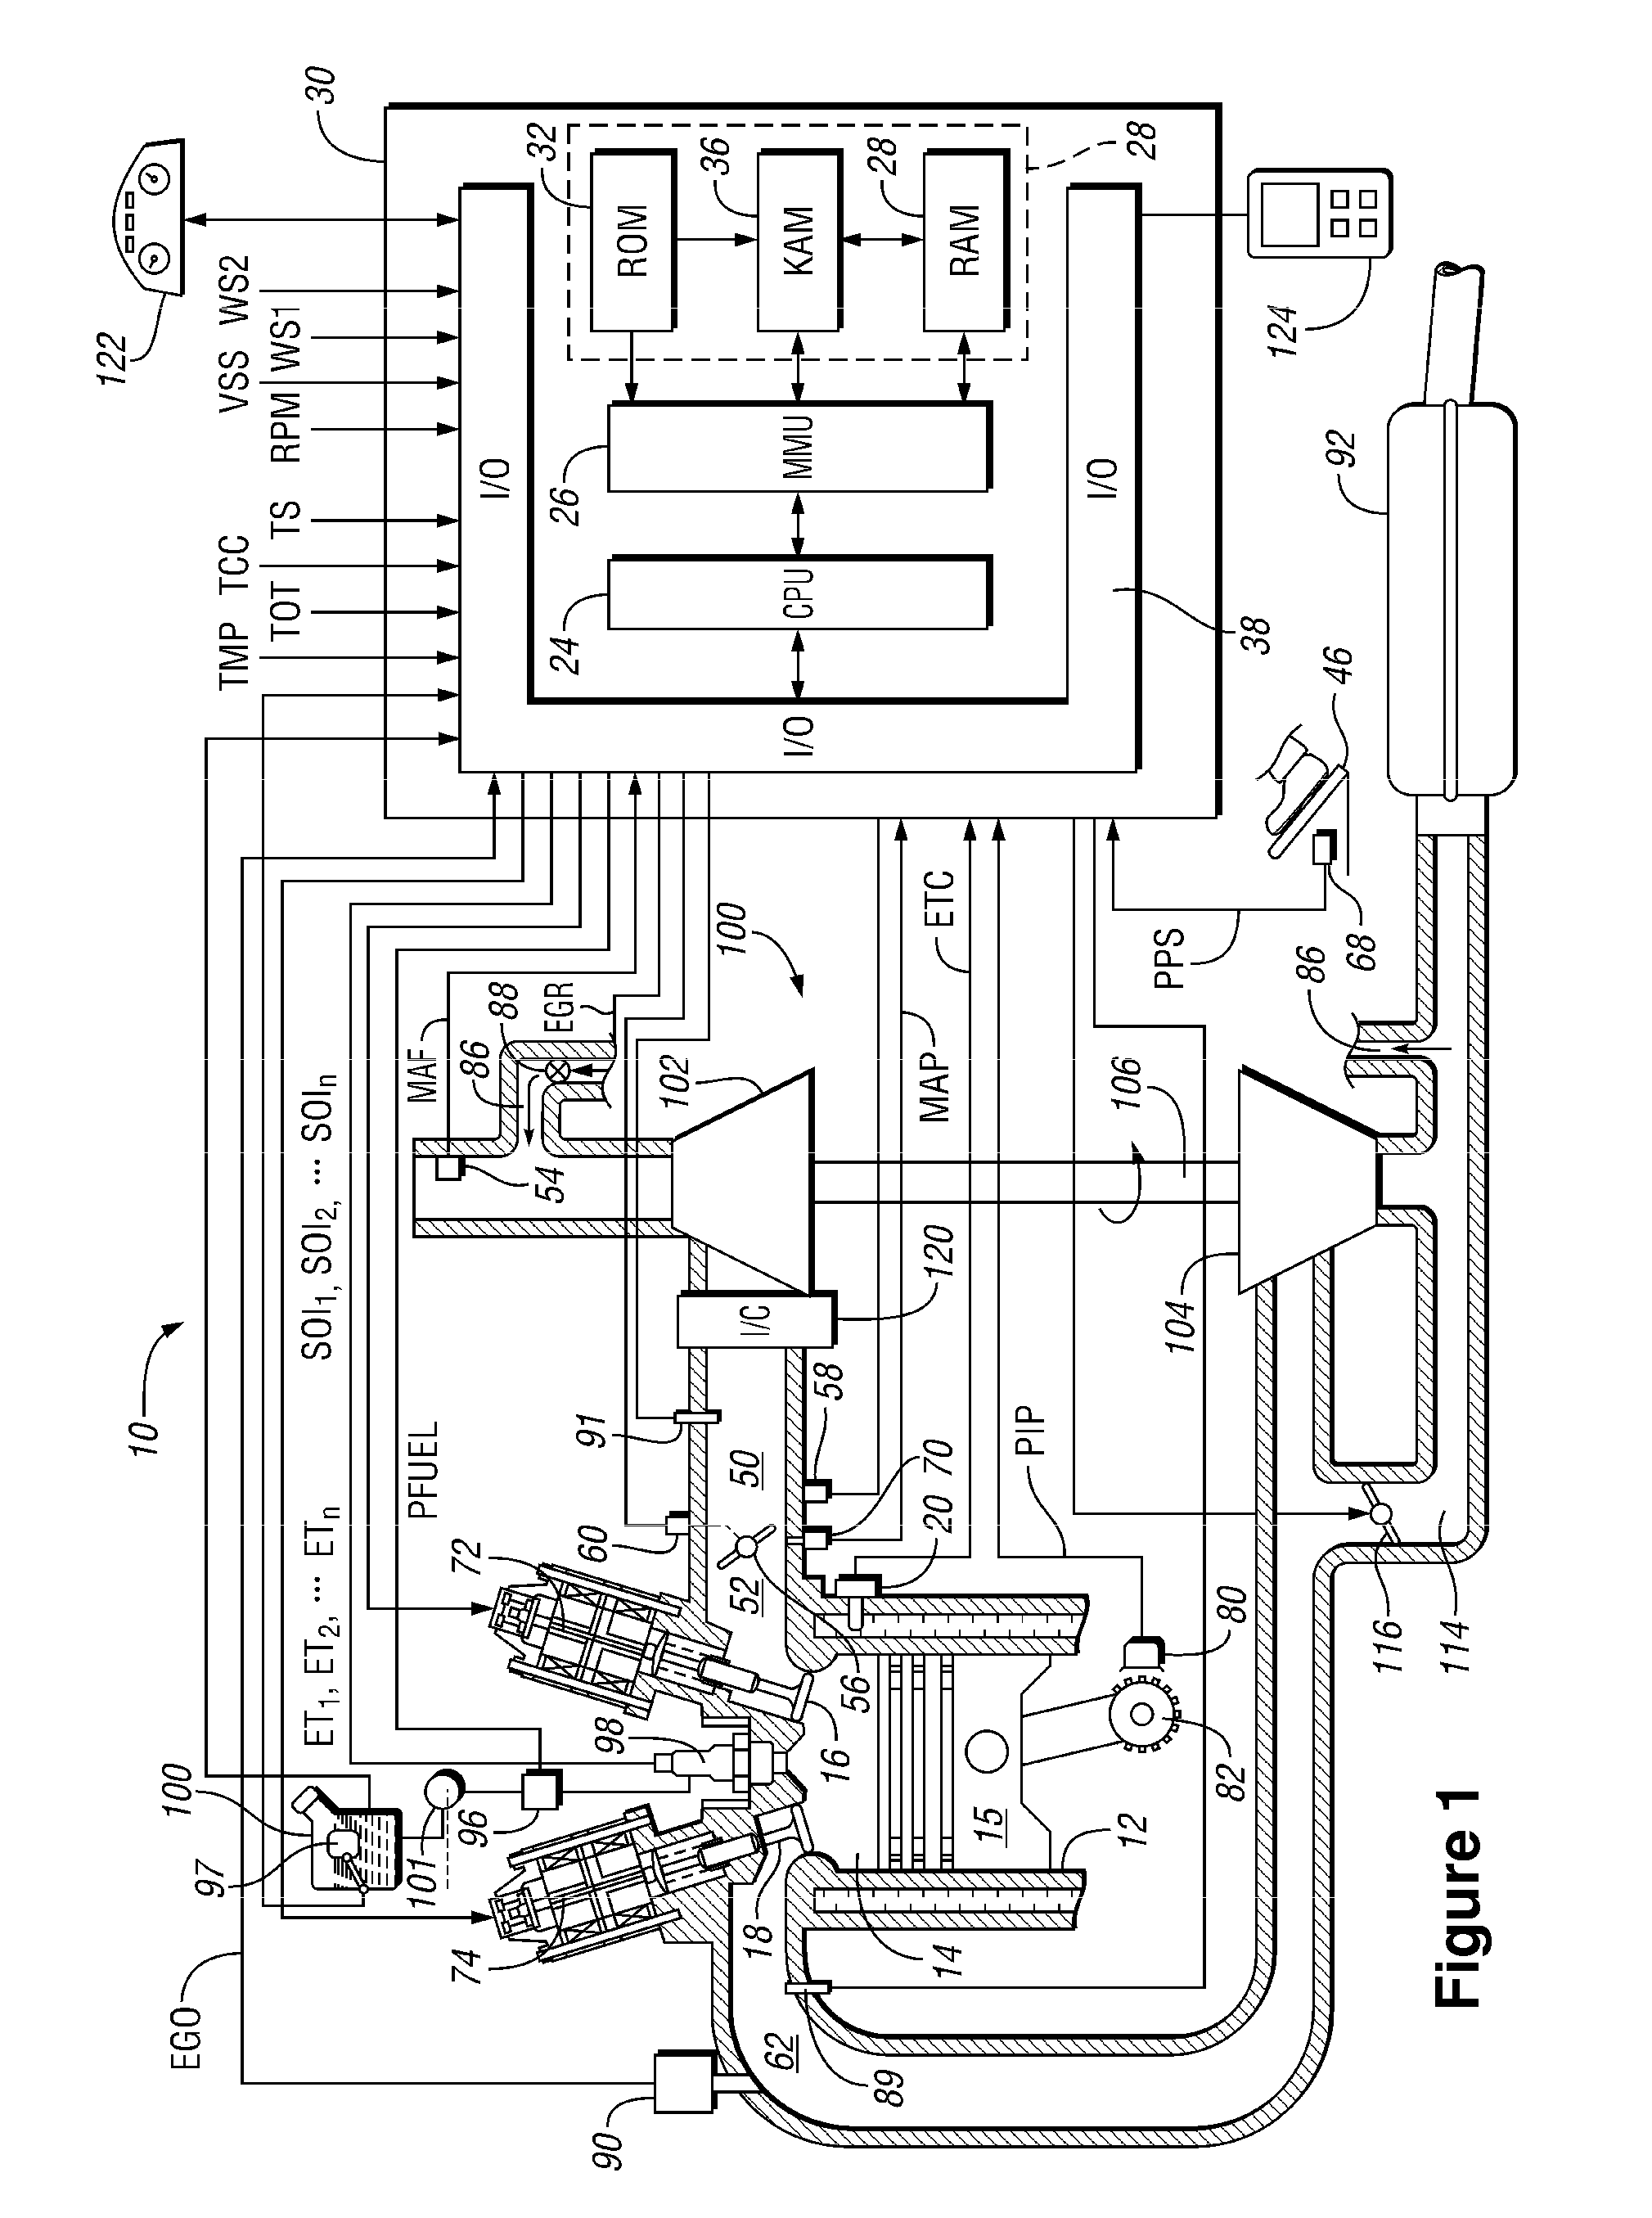 Compensation for oxygenated fuels in a diesel engine